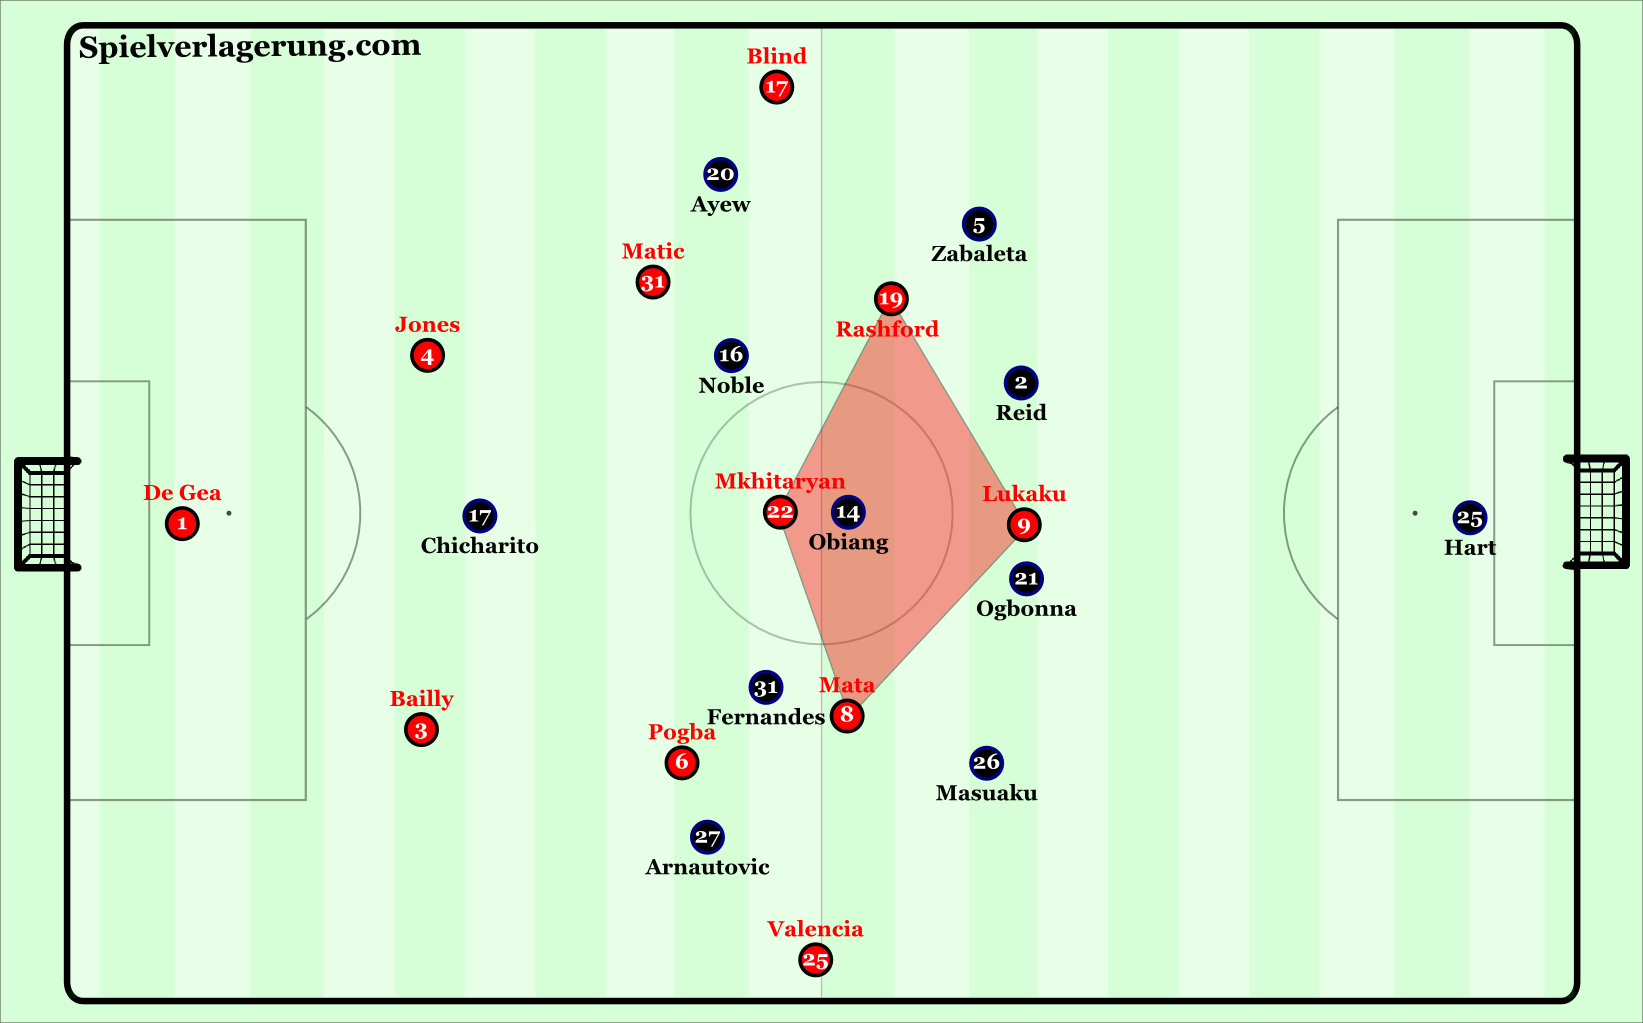 United's base attacking structure